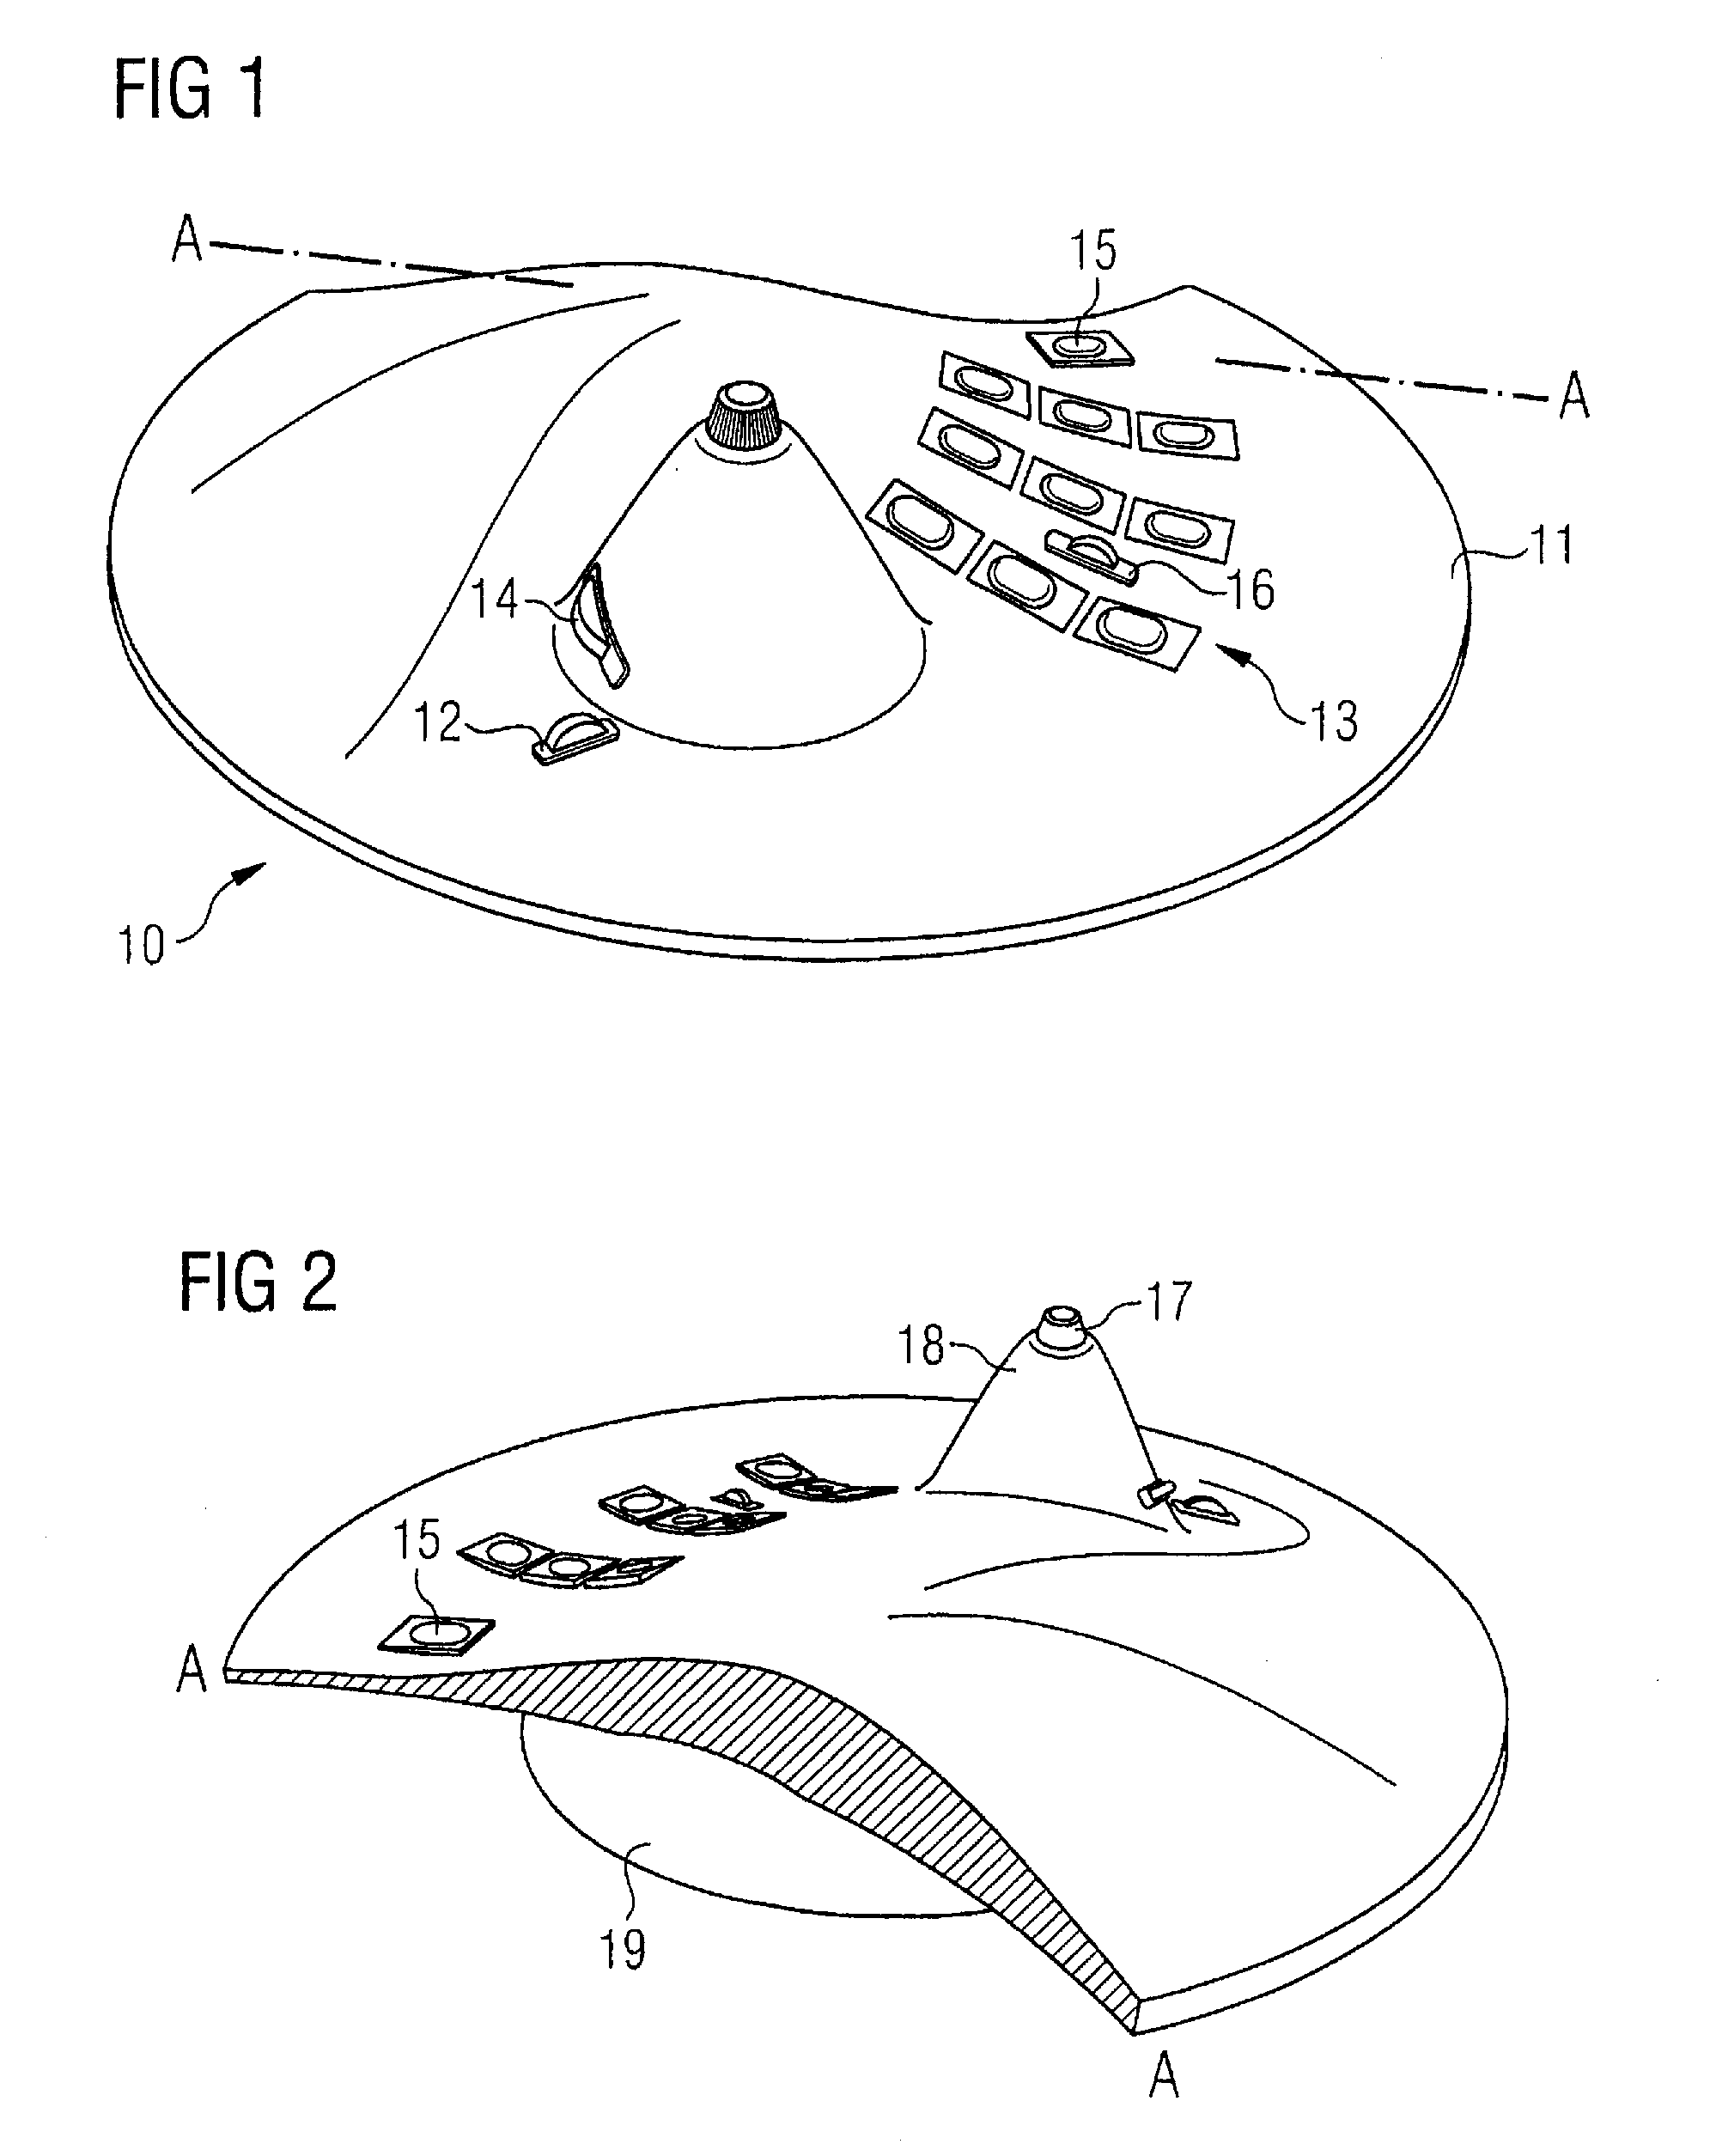 Input device to control elements of graphical user interfaces